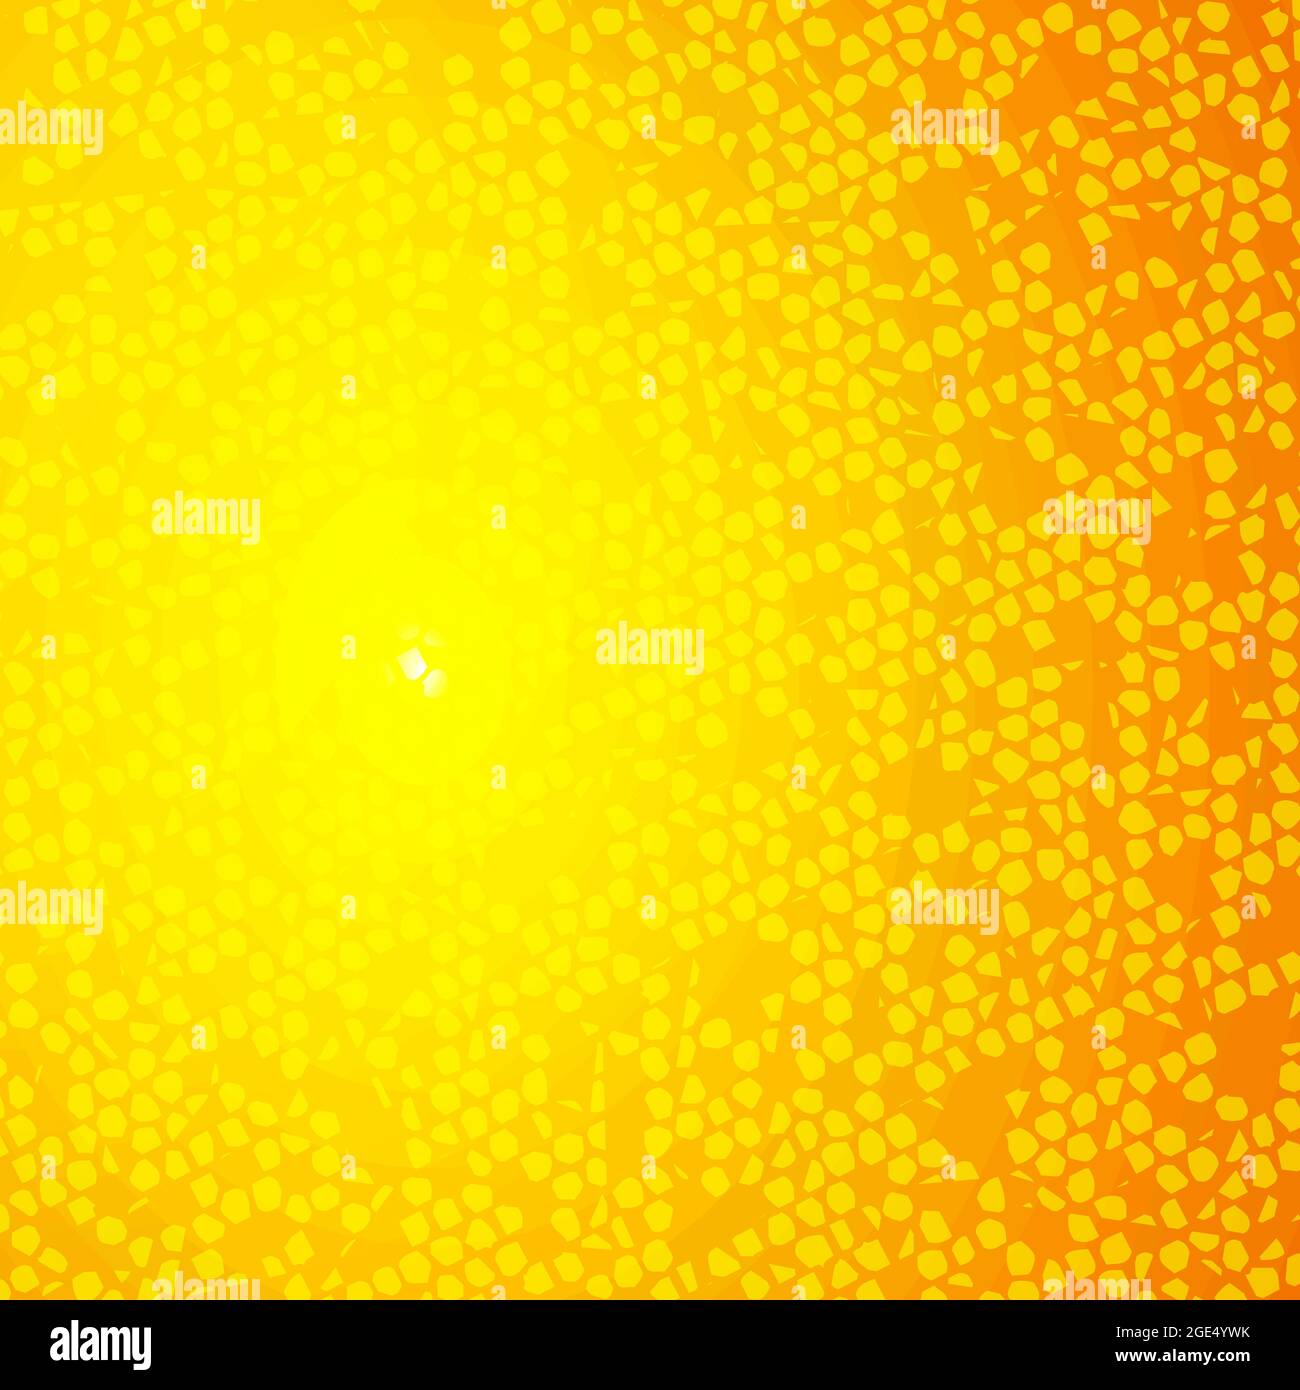 Vector image background in yellow tones with elements that create a texture similar to lemon zest. EPS 10 Stock Vector